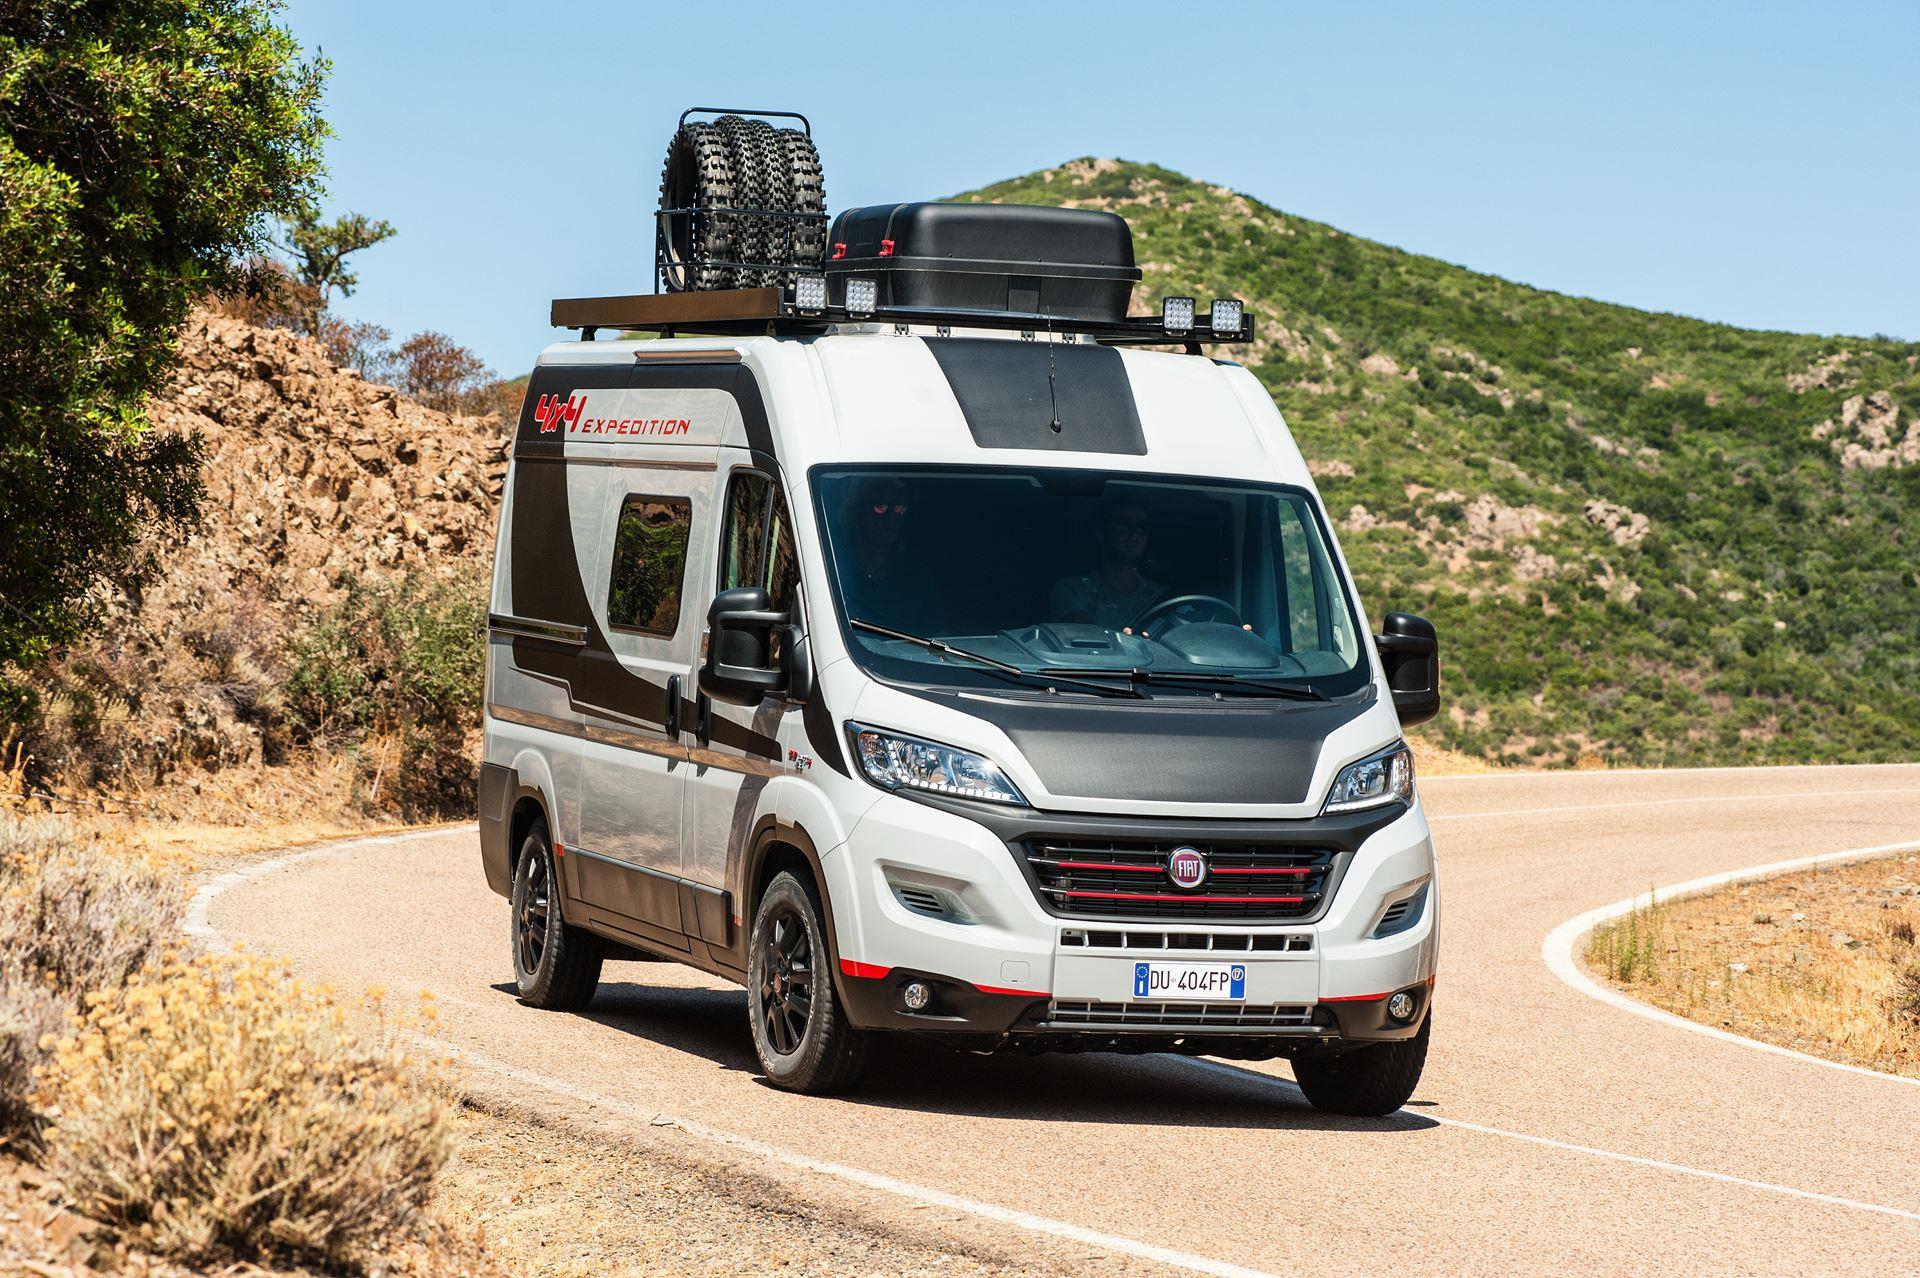 ducato 4x4 expedition price